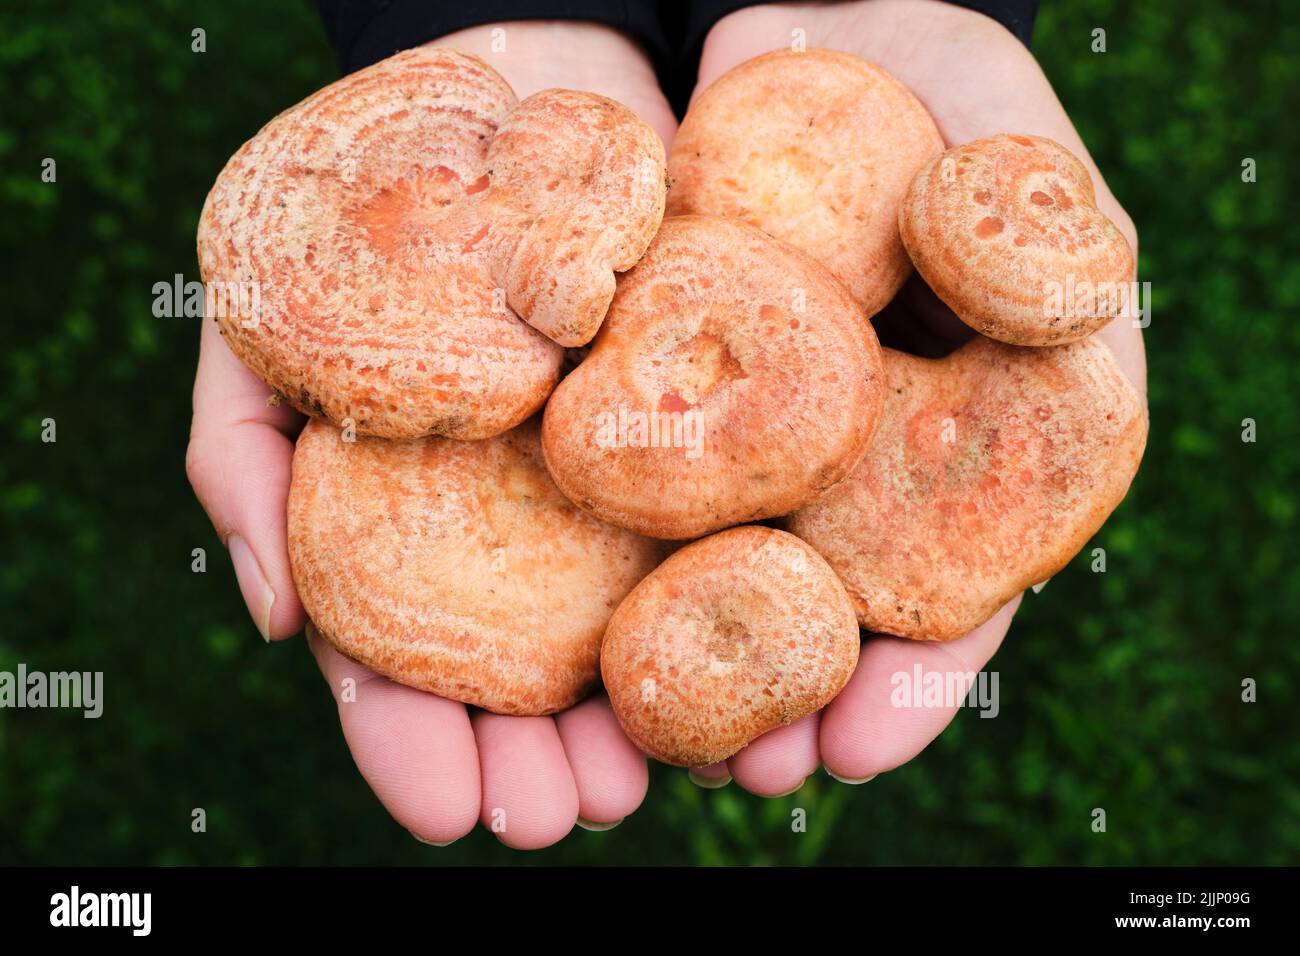 Top view of anonymous female demonstrating handful of fresh mushrooms picked in woods Stock Photo